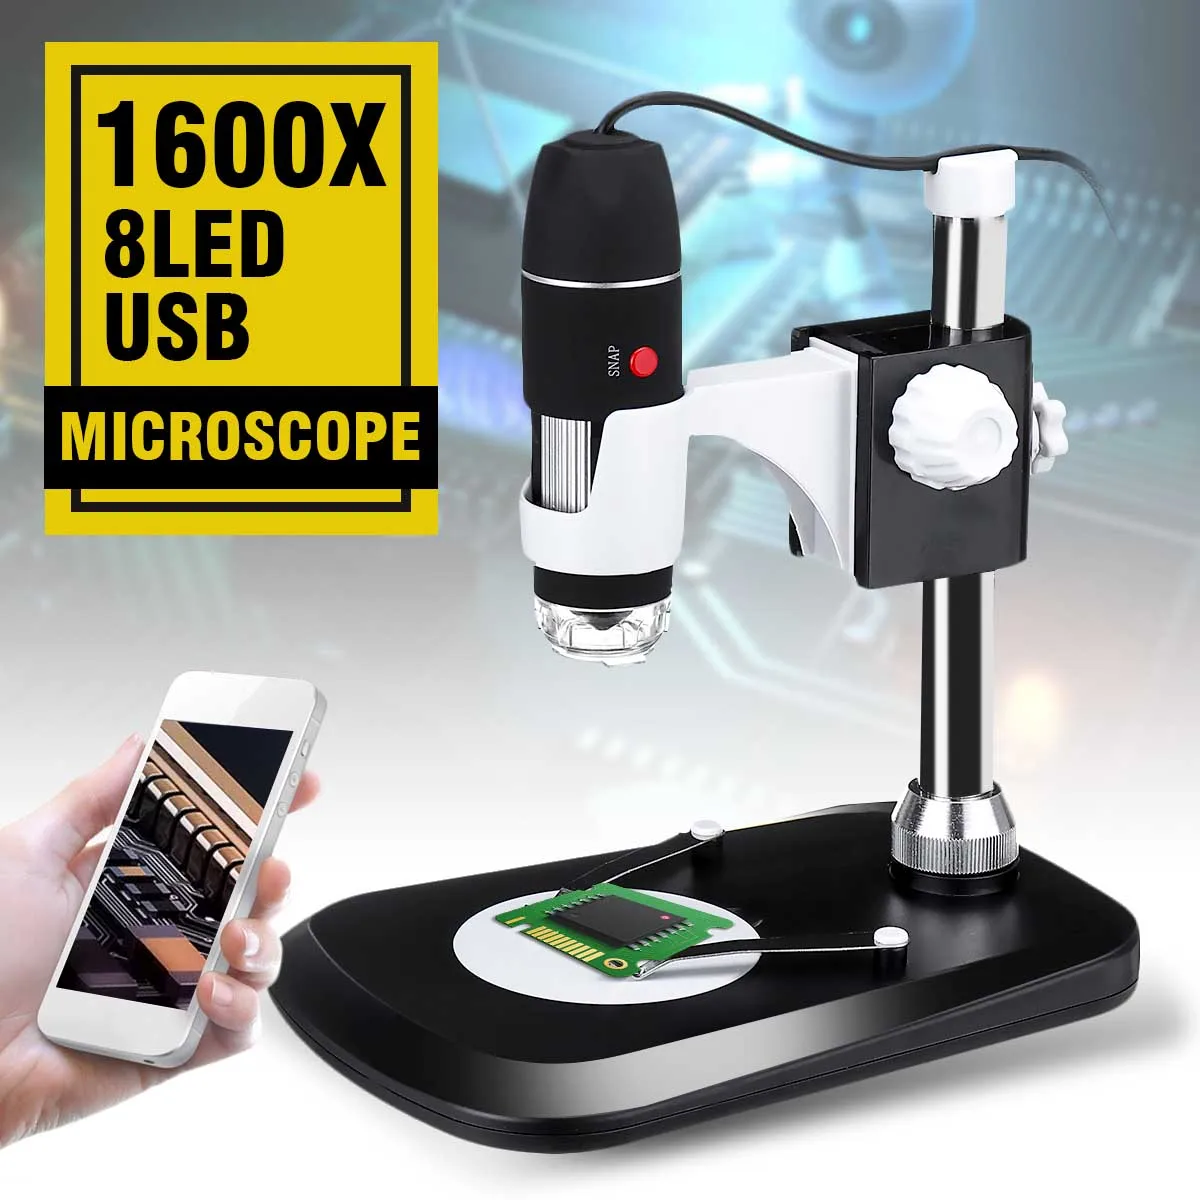 2MP Microscope Camera with Metal Stand Mac PC and Tablet，50 to 1000xMagnification Endoscope Compatible with Windows PC Schine USB Microscope,Iitrust 8 LED USB 2.0 Digital Microscope 